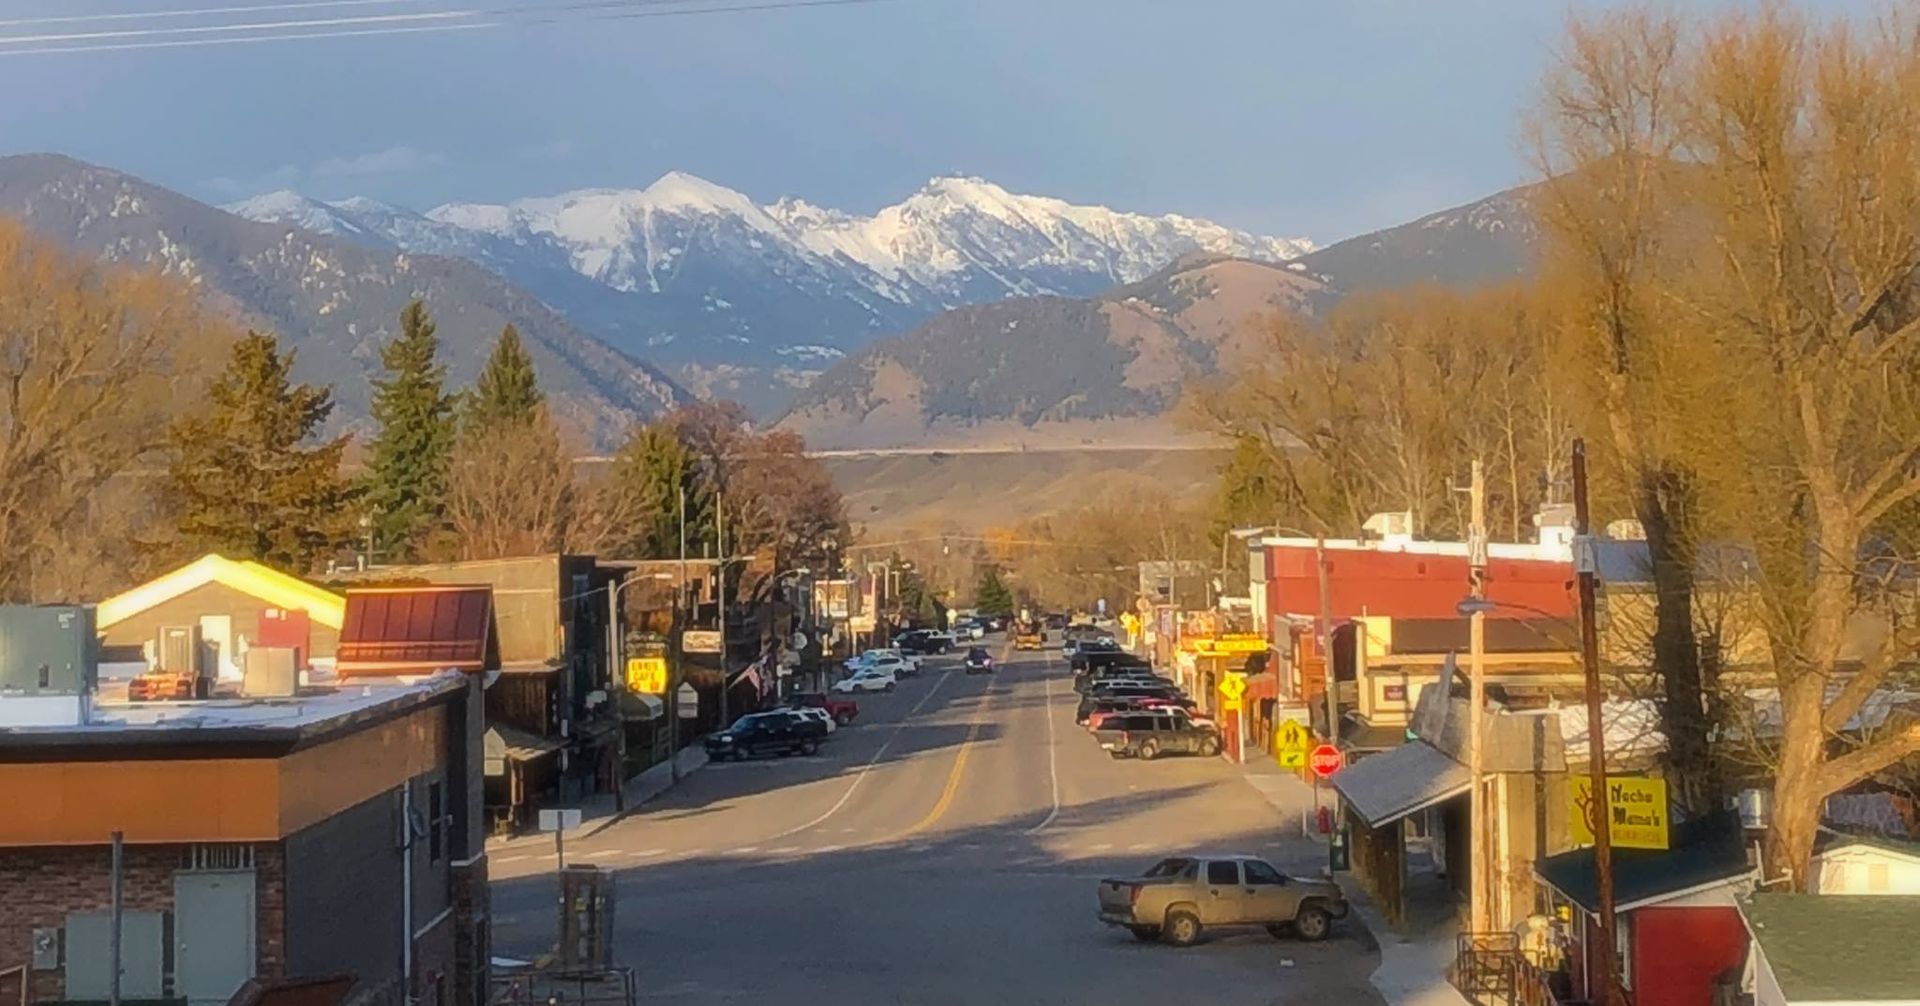 A view of a small town with mountains in the background